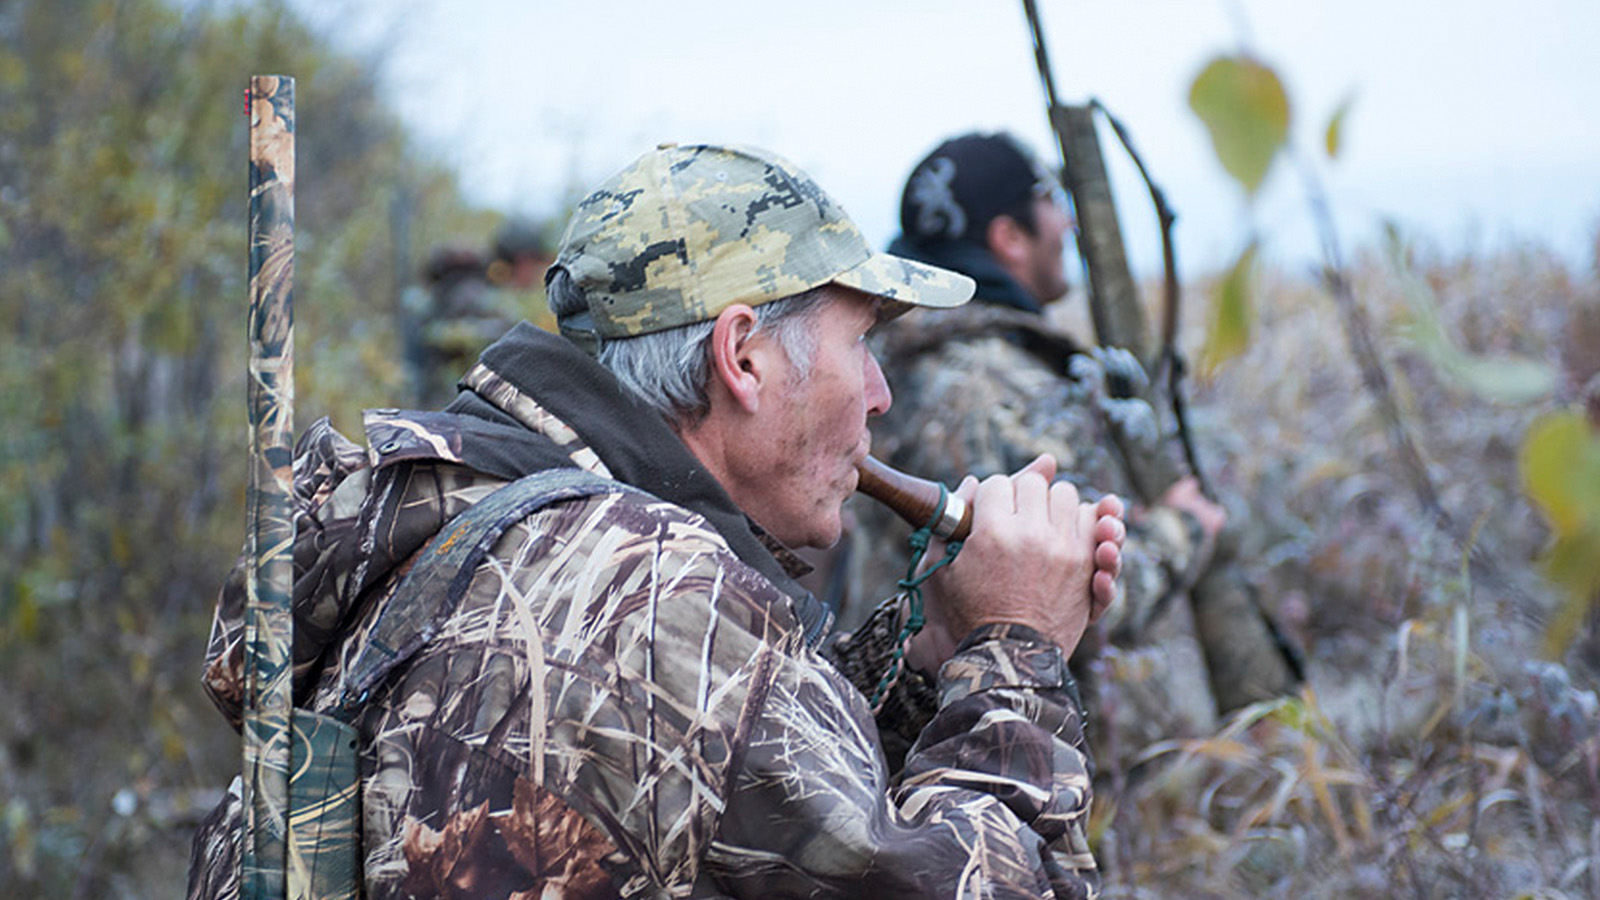 Waterfowl hunter calling during a hunt